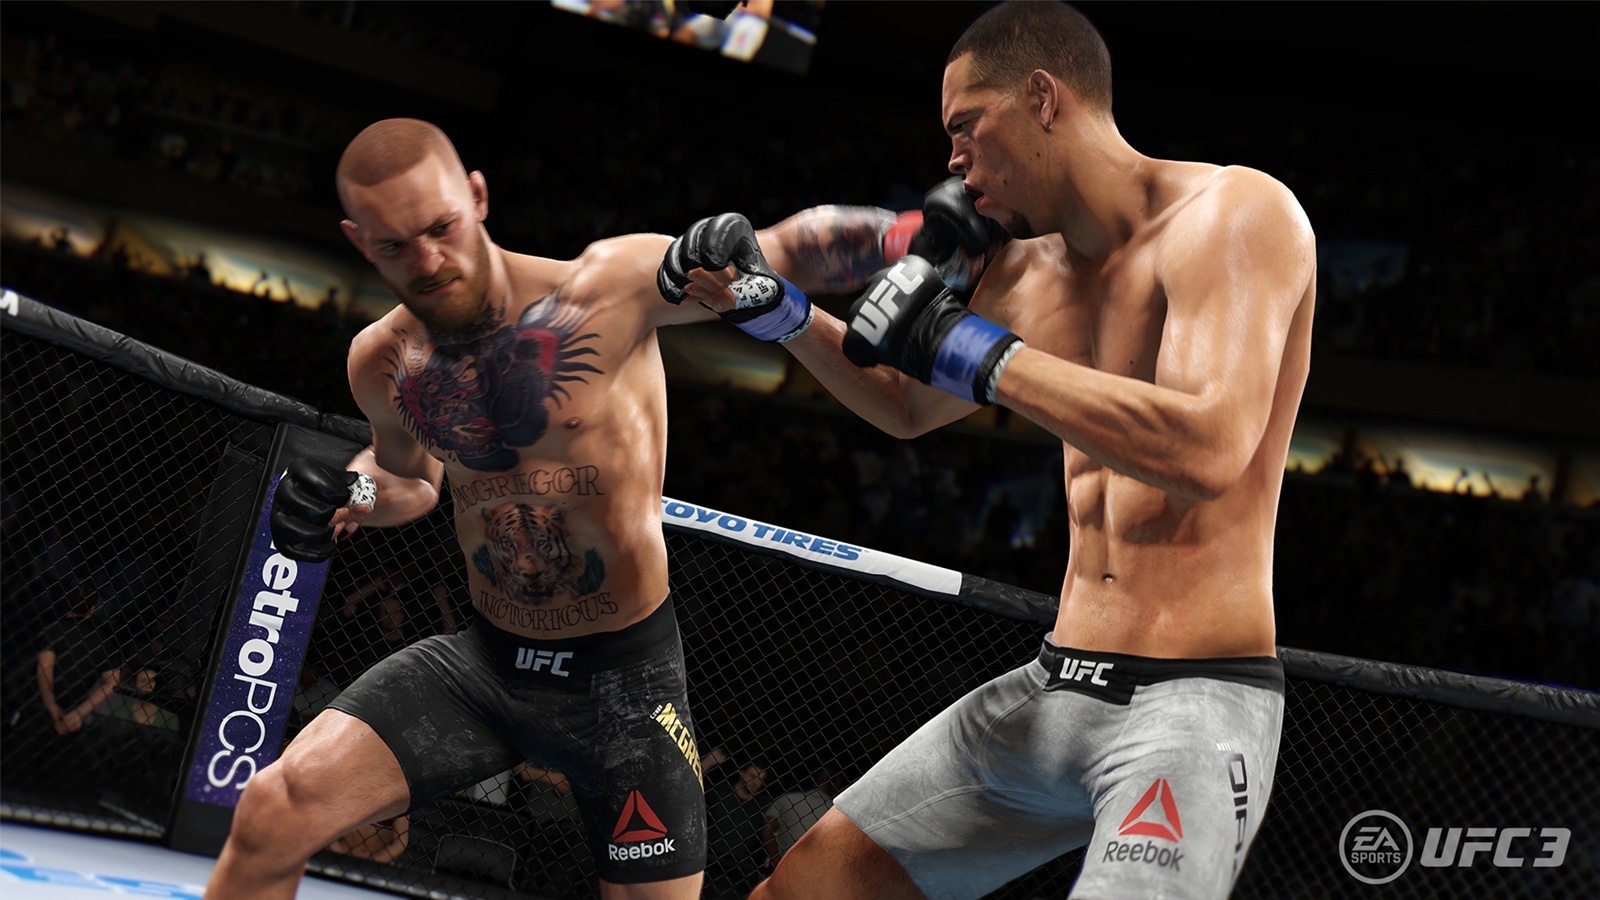 EA's 'UFC 3' takes the fight beyond the Octagon | DeviceDaily.com